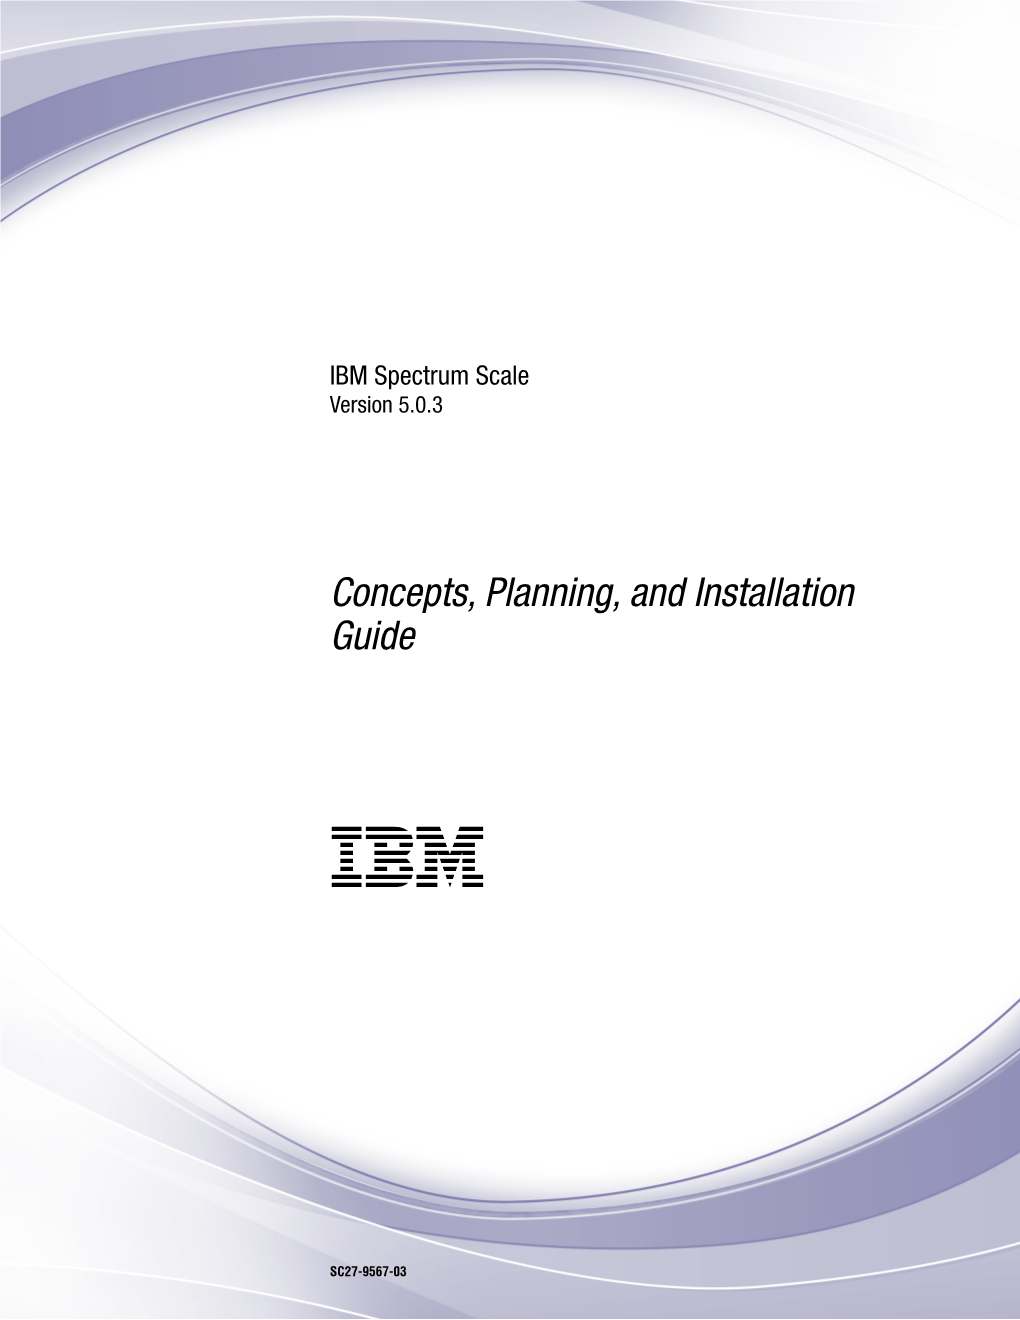 IBM Spectrum Scale 5.0.3: Concepts, Planning, and Installation Guide Configuration of an IBM Spectrum Scale Stretch Chapter 8